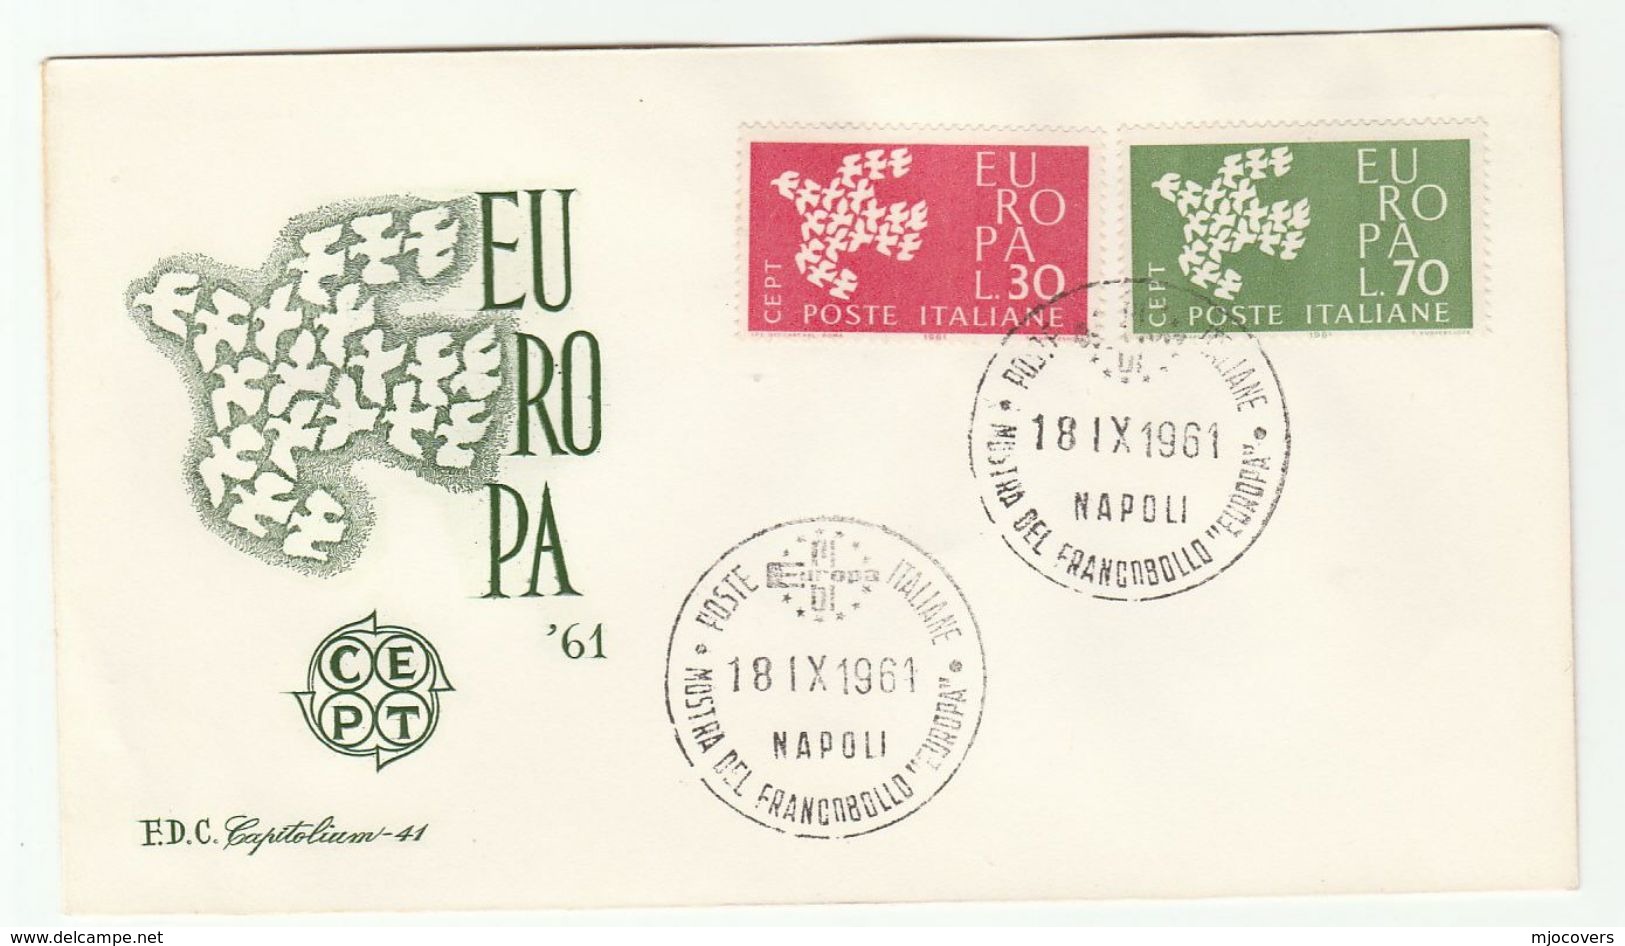 1961 ITALY FDC EUROPA Stamps SPECIAL Pmk PHILATELIC EXHIBITION NAPLES Cover - 1961